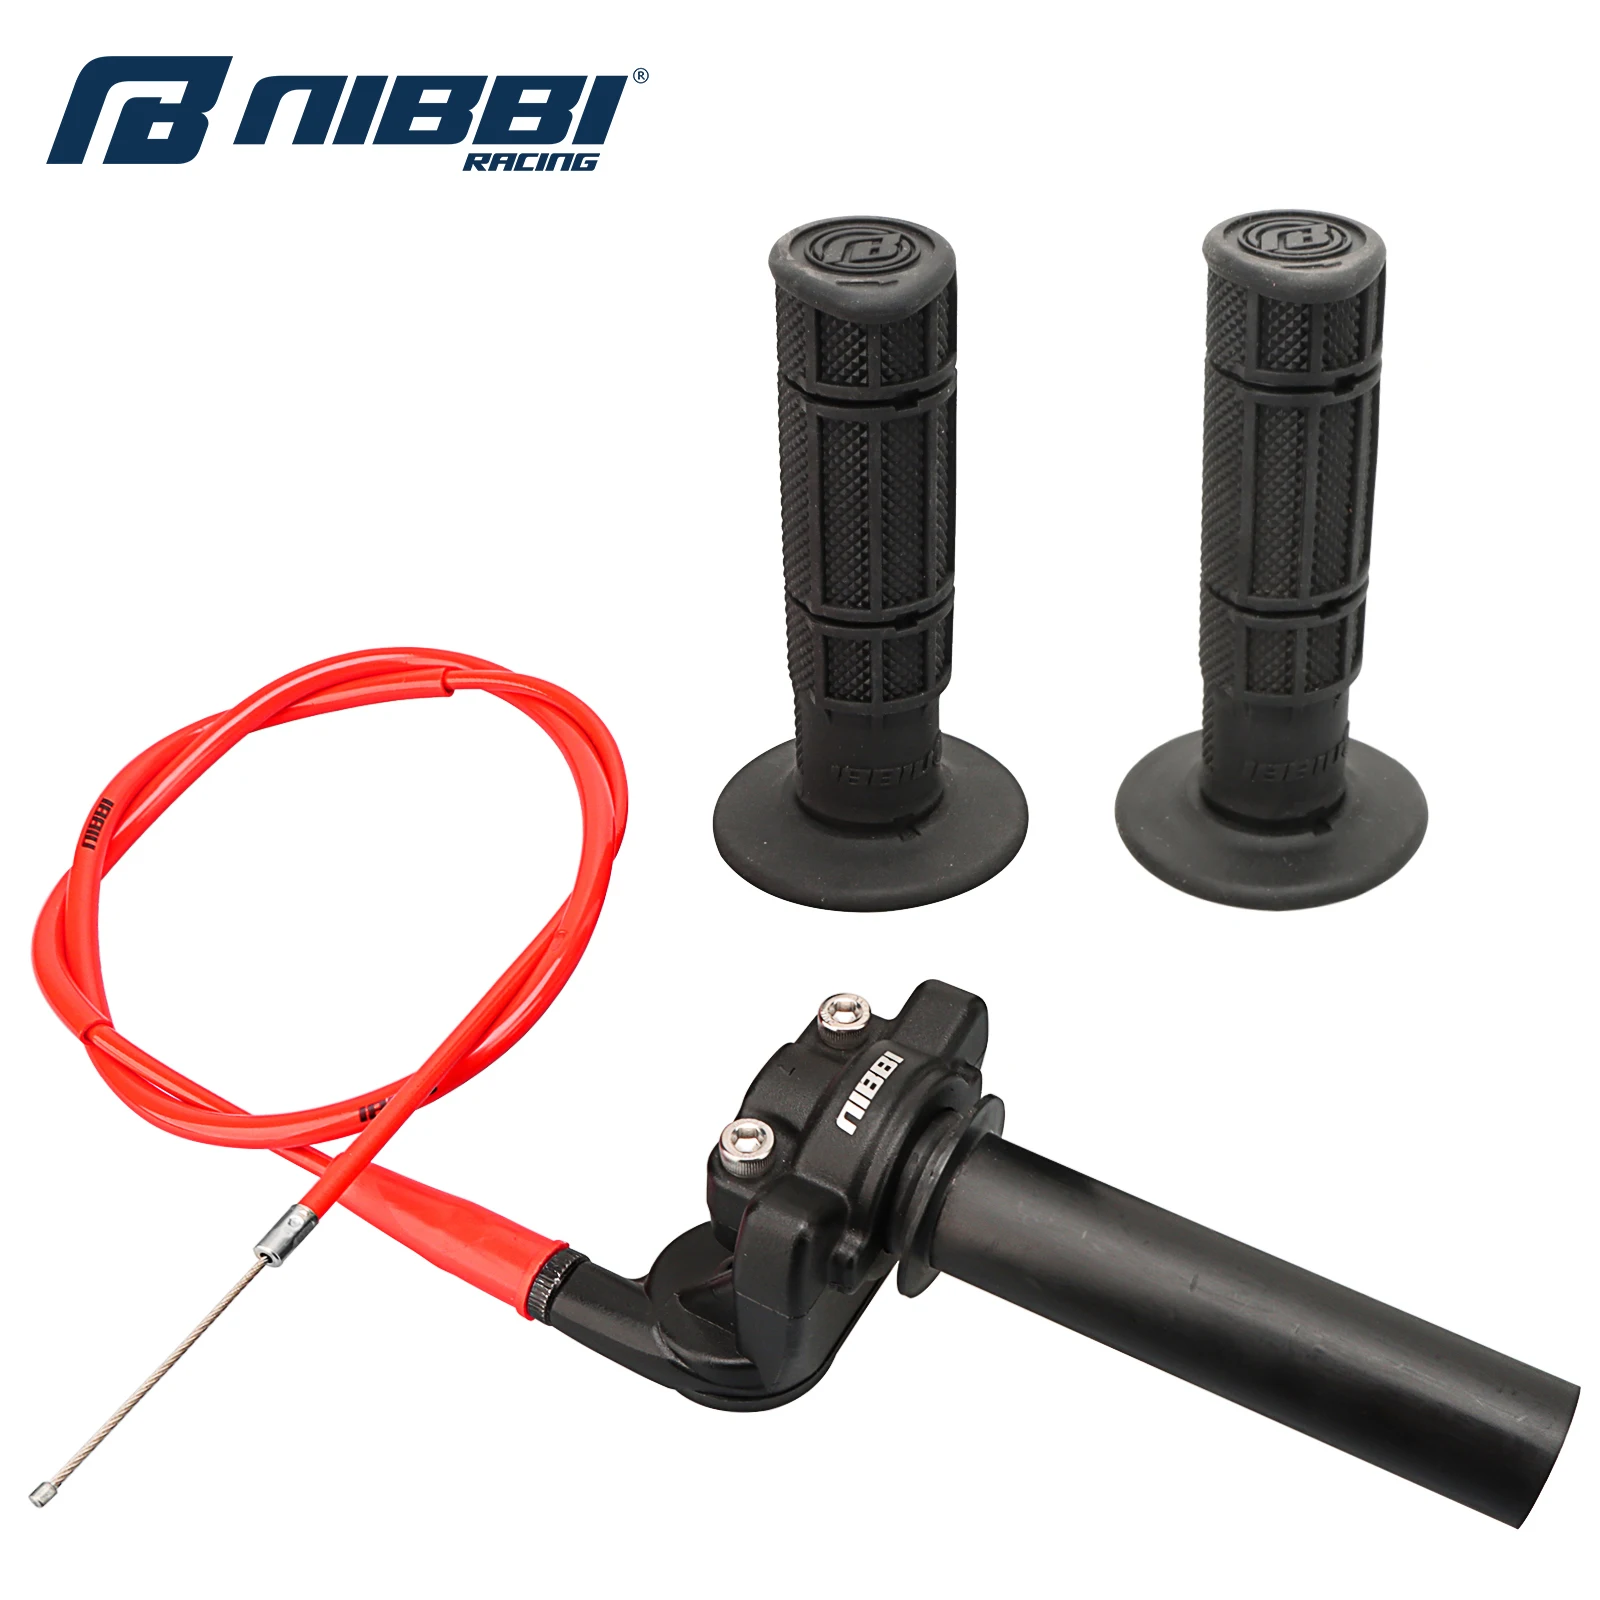 NIBBI Twists Throttle Grip Dirt Bike Grips with Throttle Cable Handlebar Grip 22mm Motorcycle Throttle Assembly for motocross